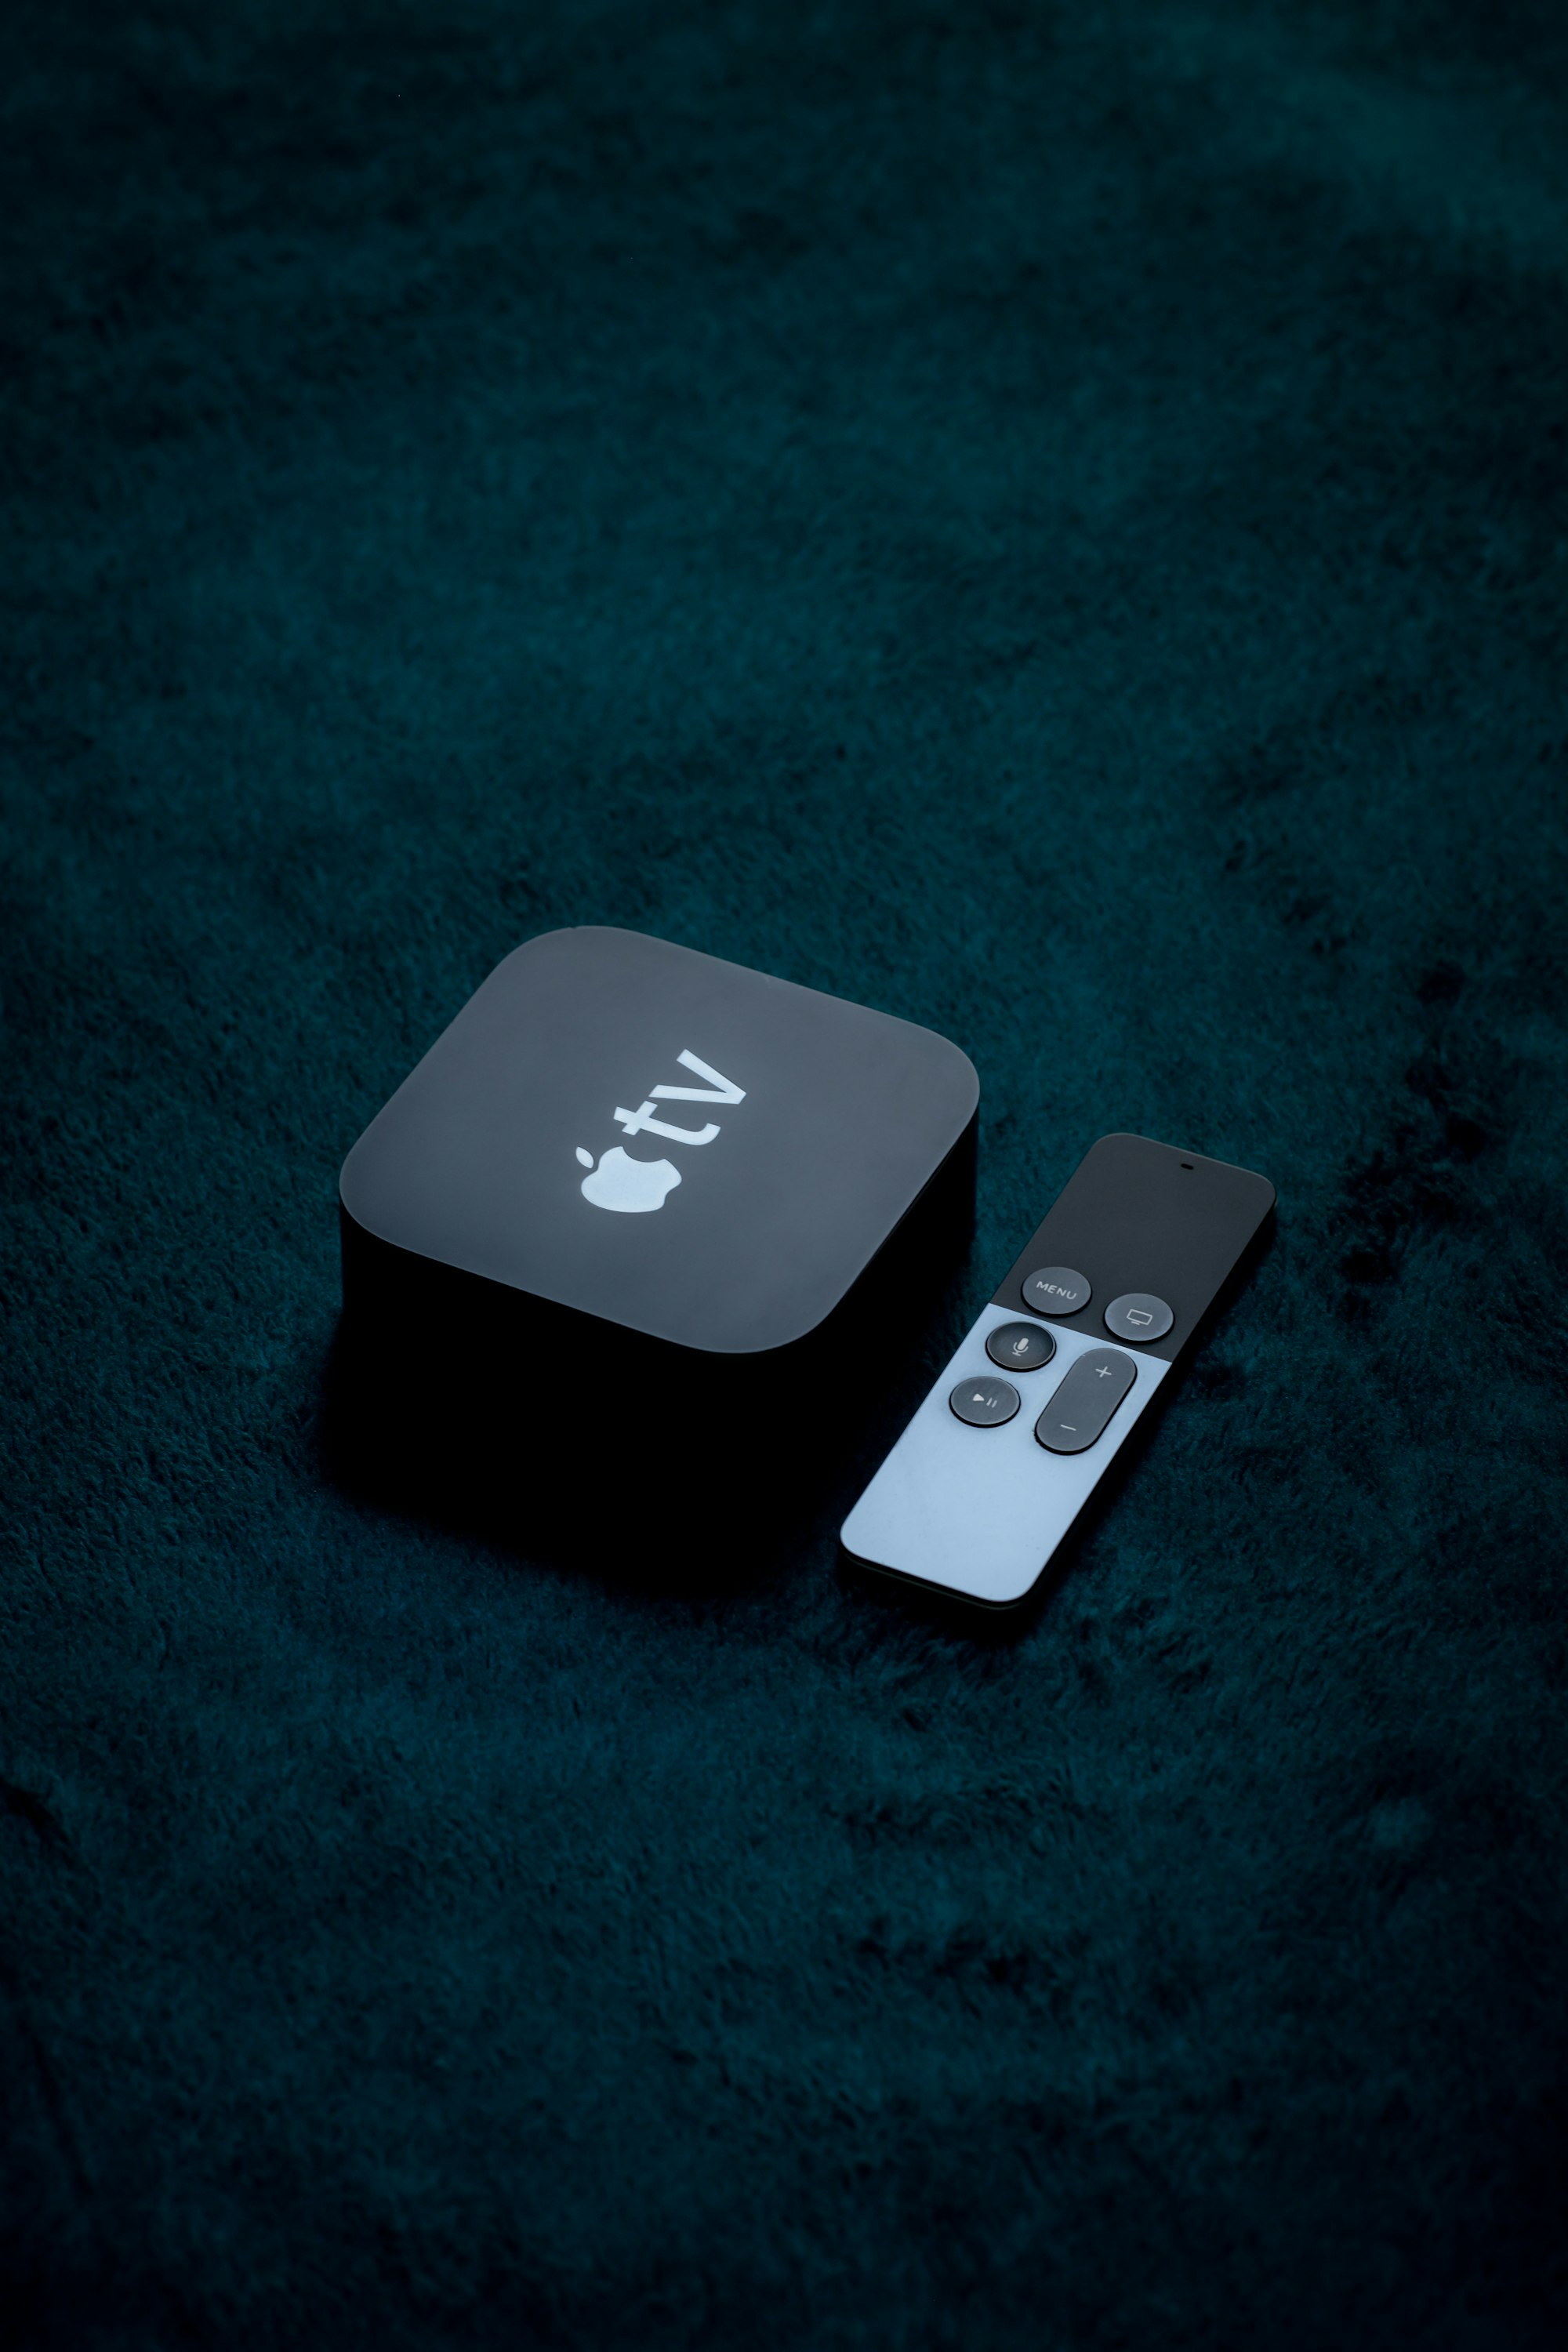 Apple has taken a unique approach for its streaming service - Apple TV+